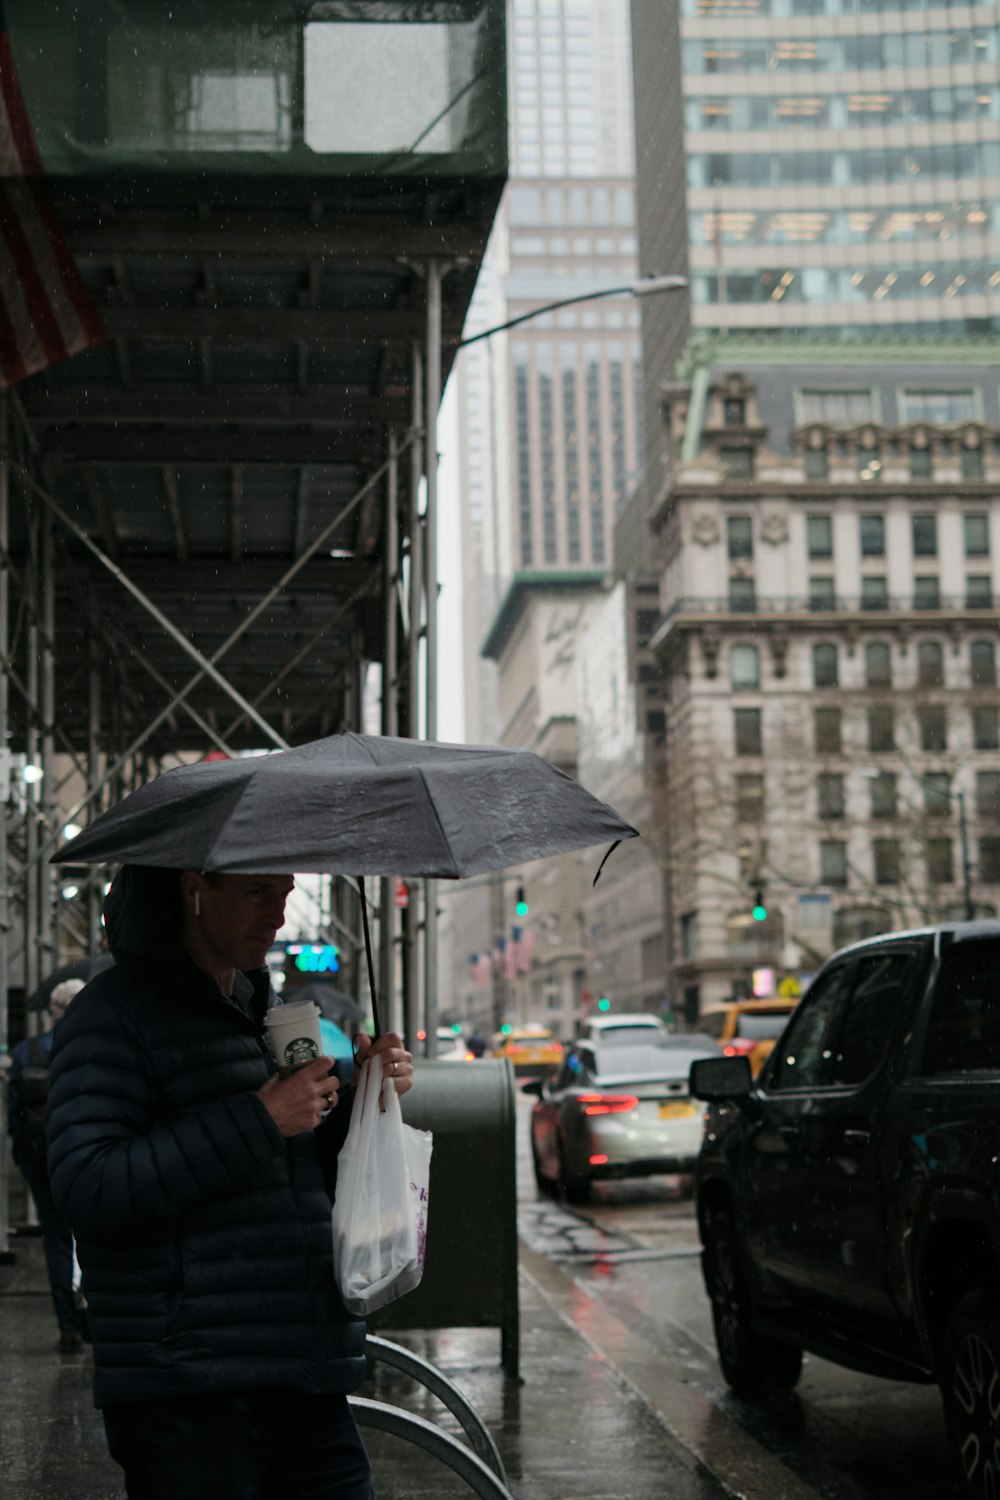 a person holding an umbrella on a city street